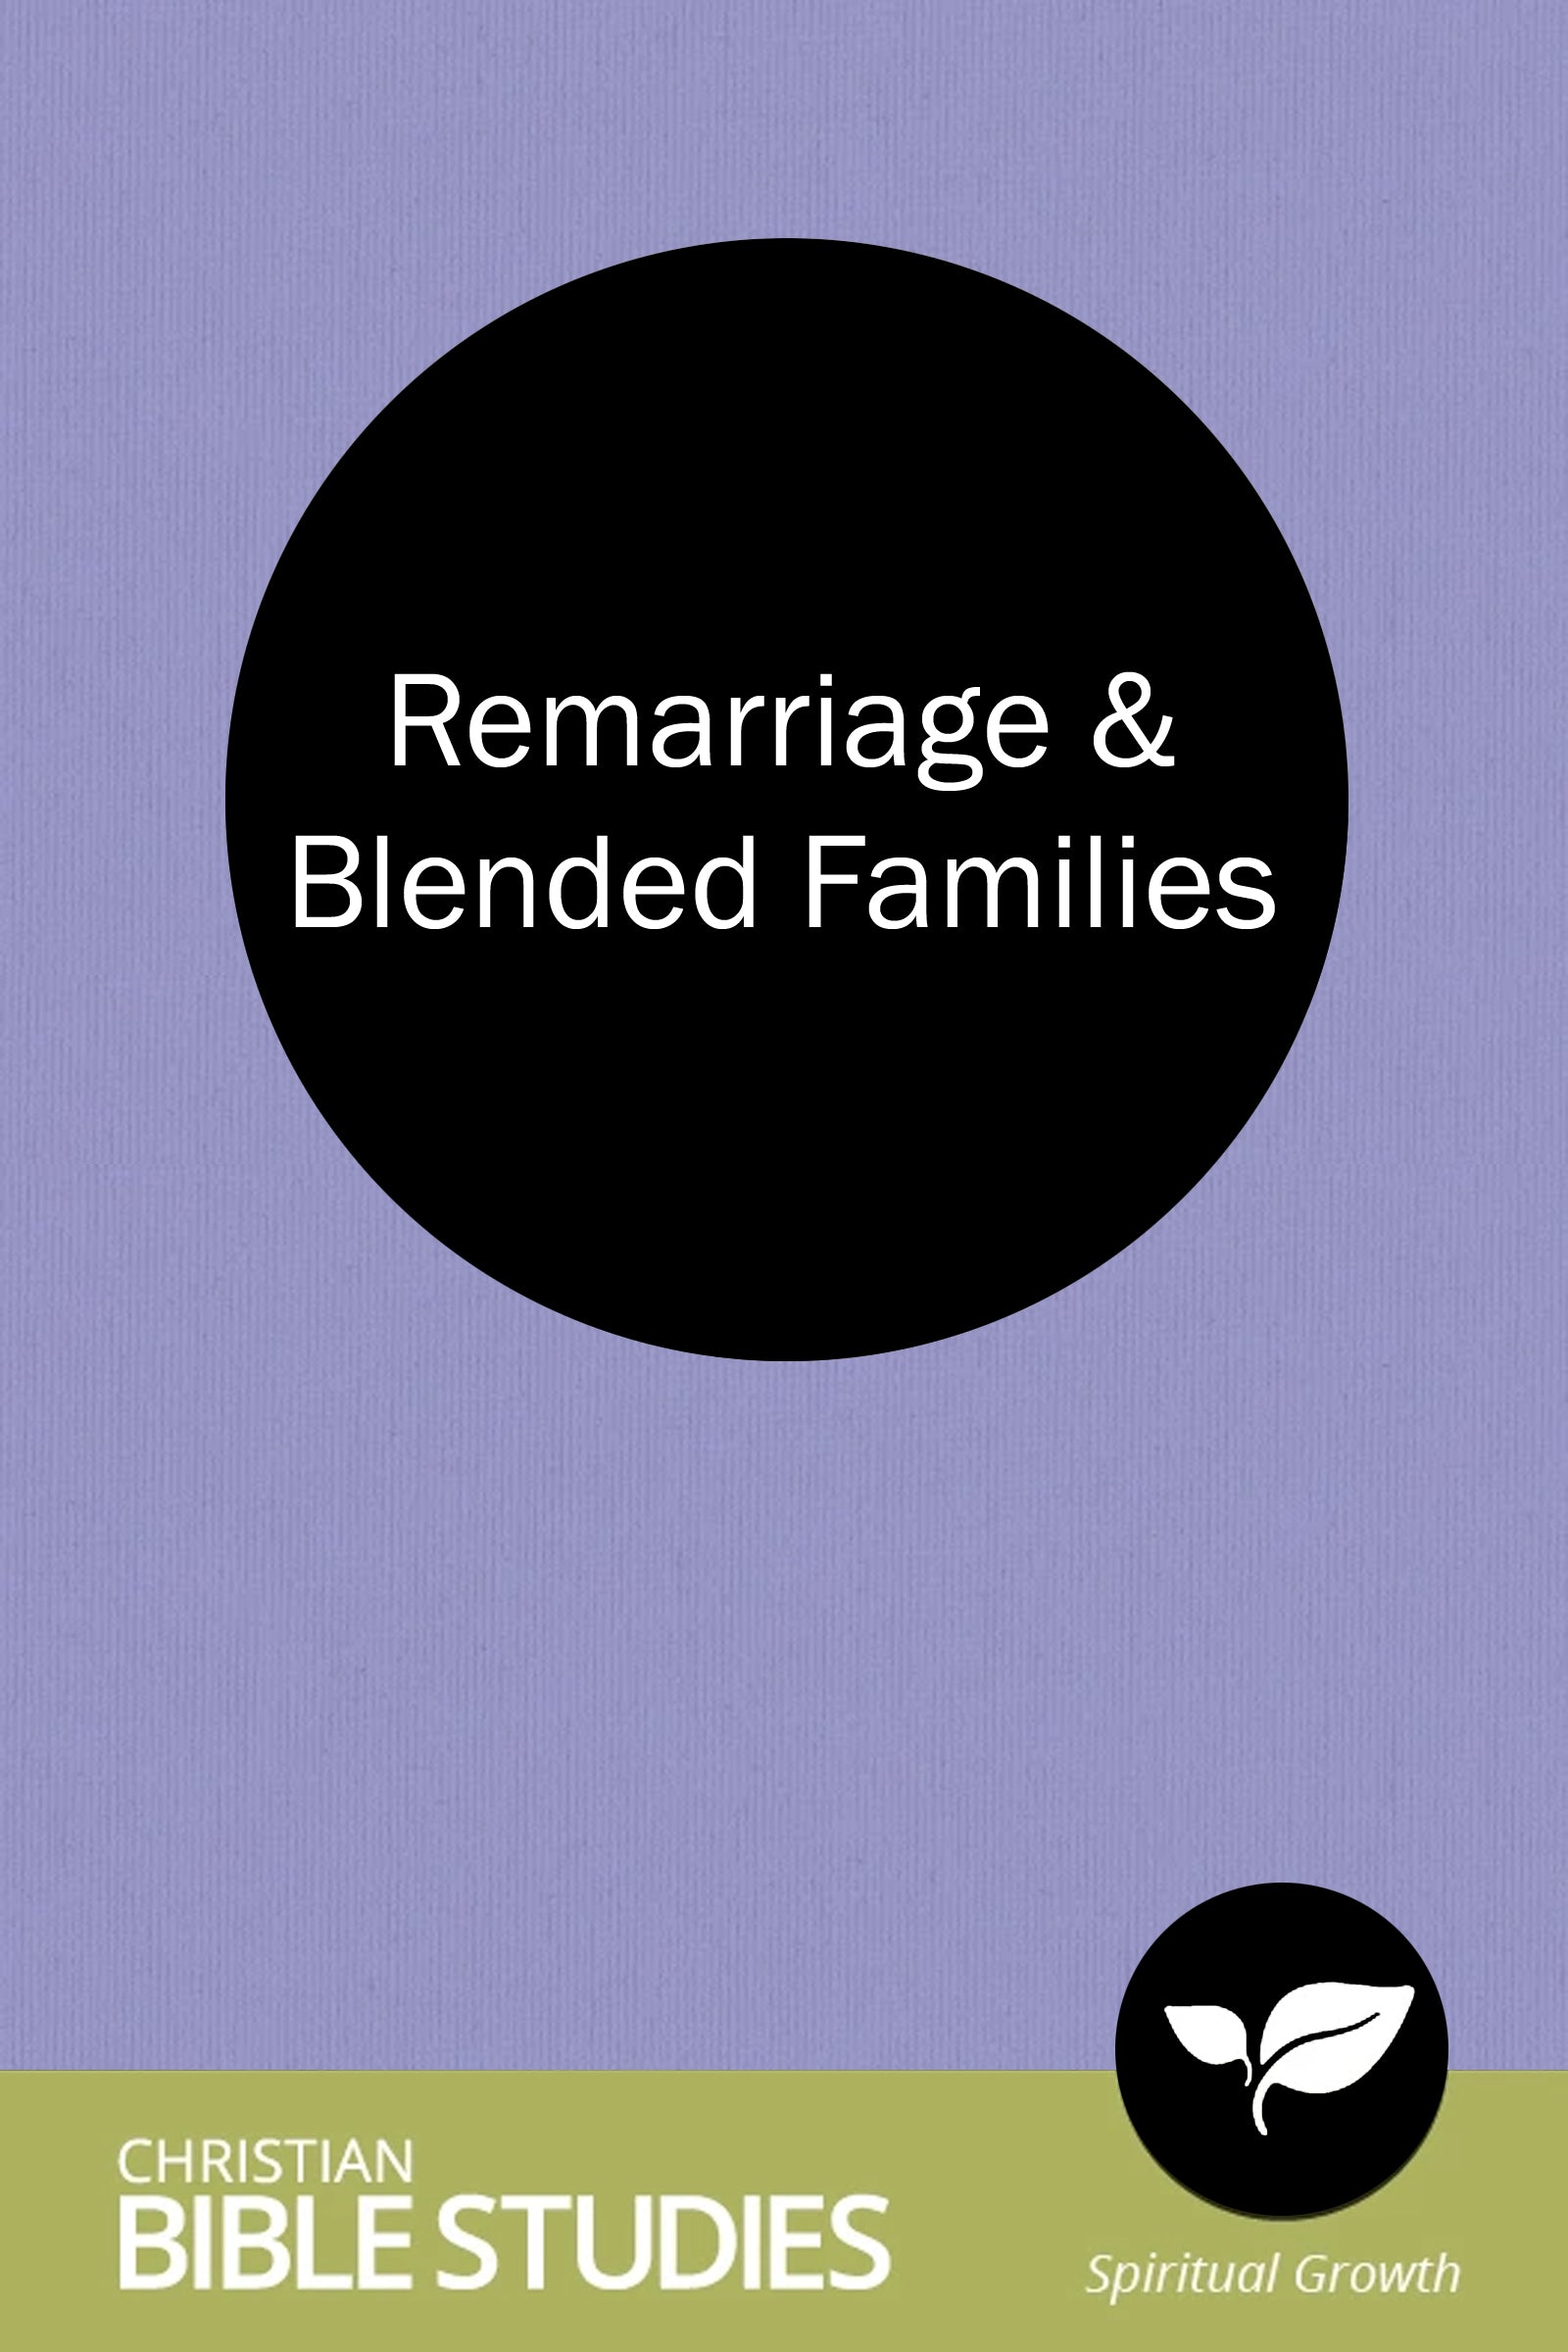 Remarriage & Blended Families